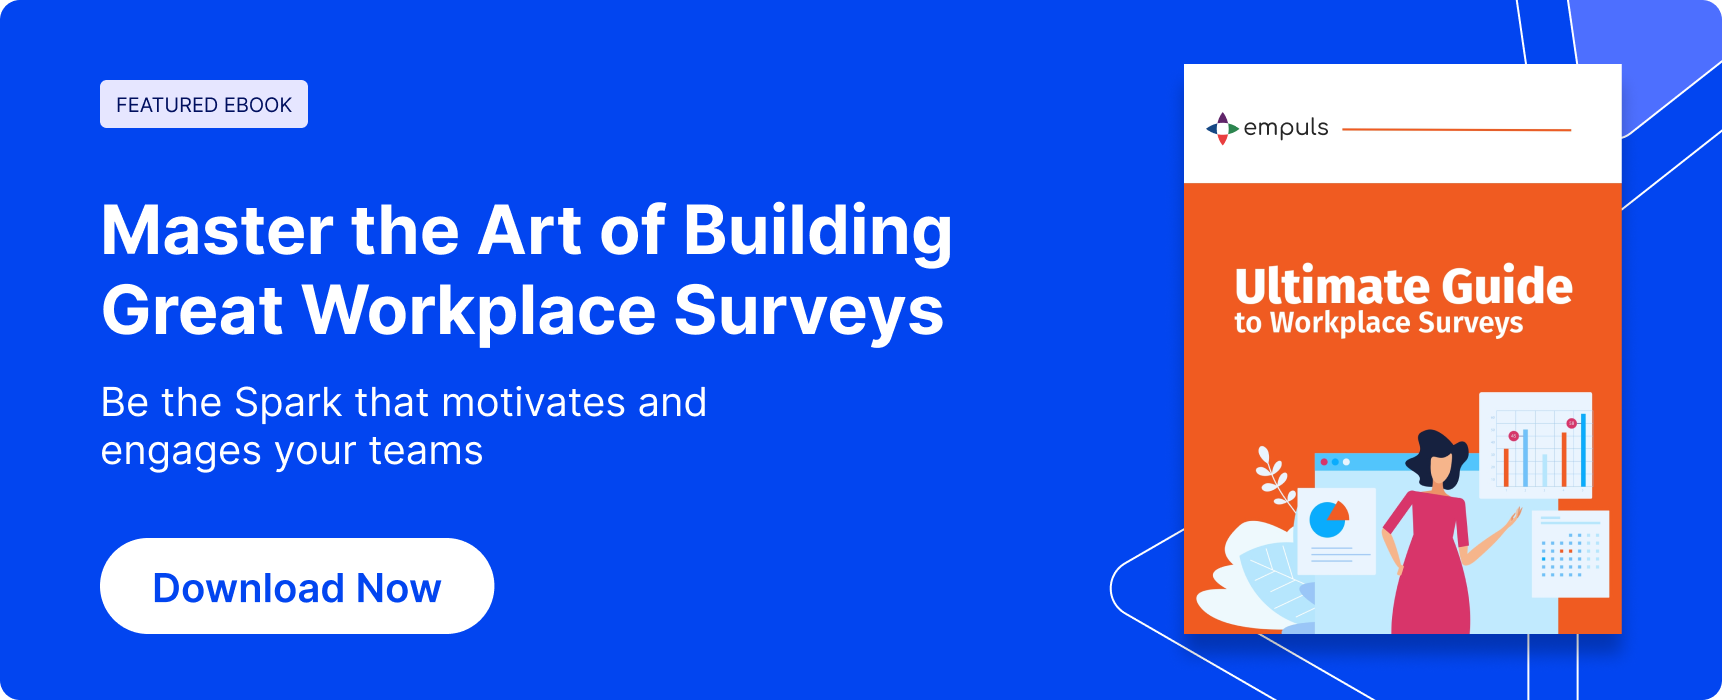 guide to workpplace surveys